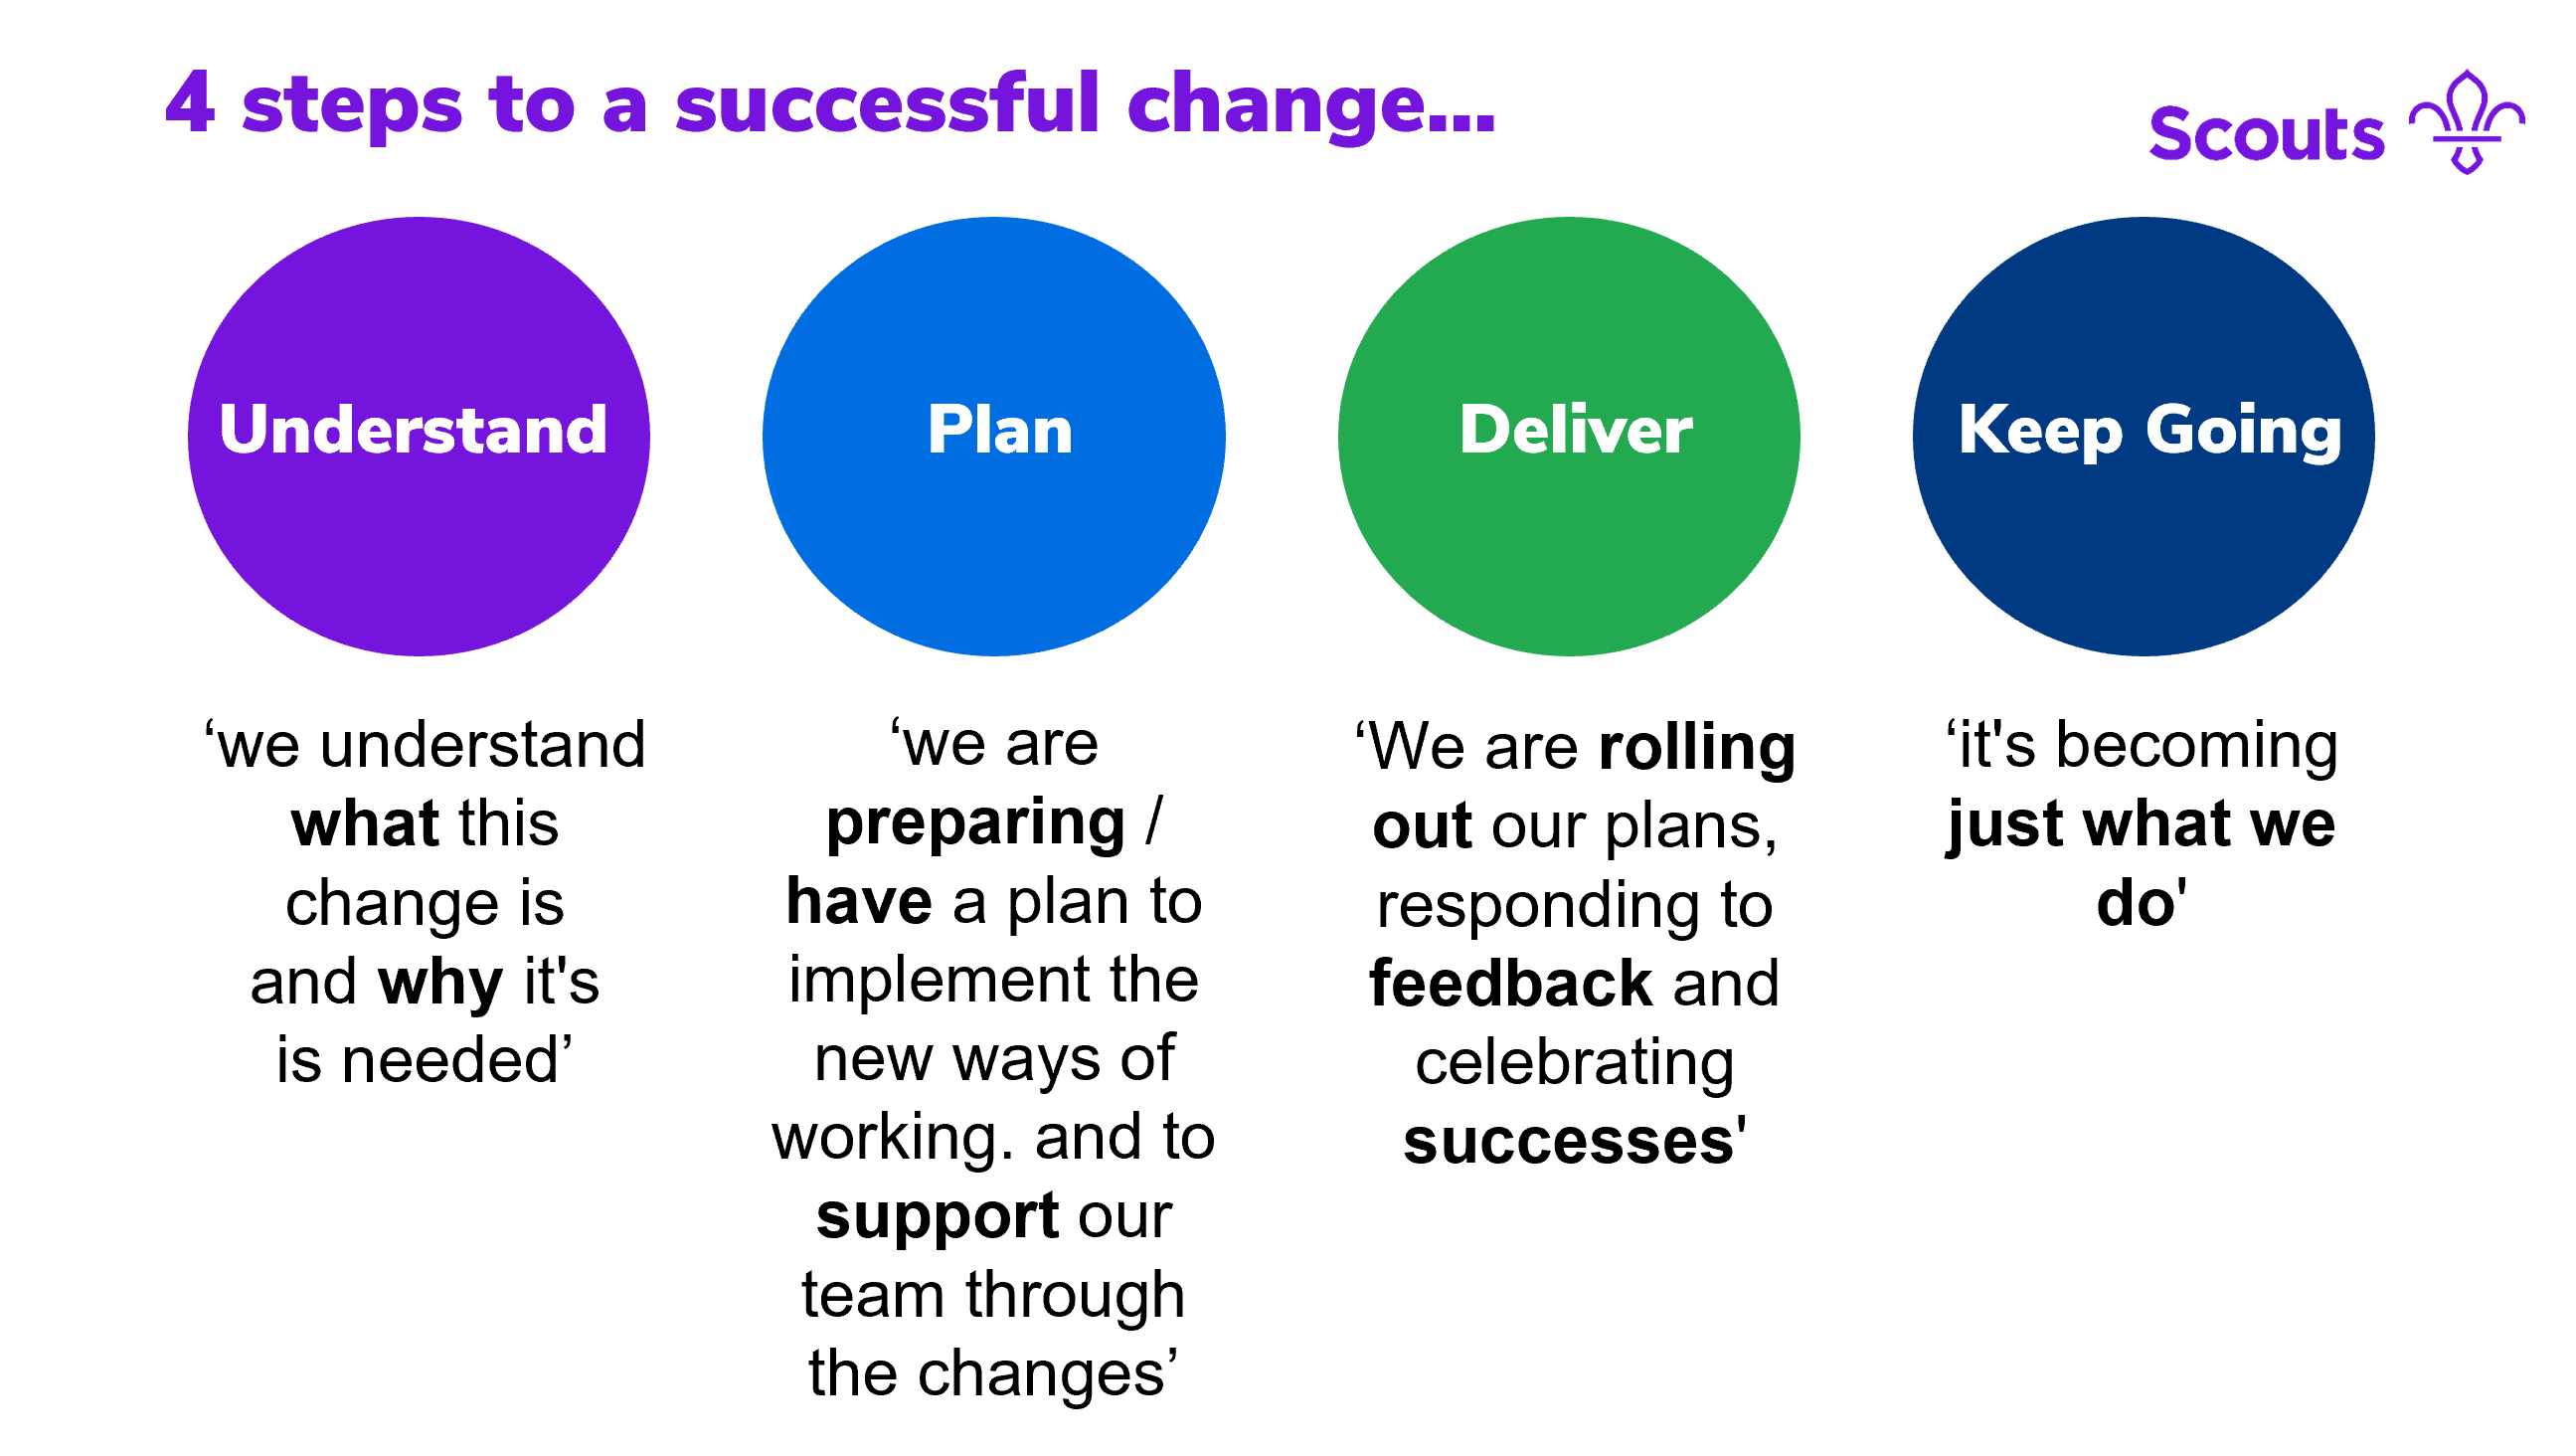 our 4 steps to a successful change...